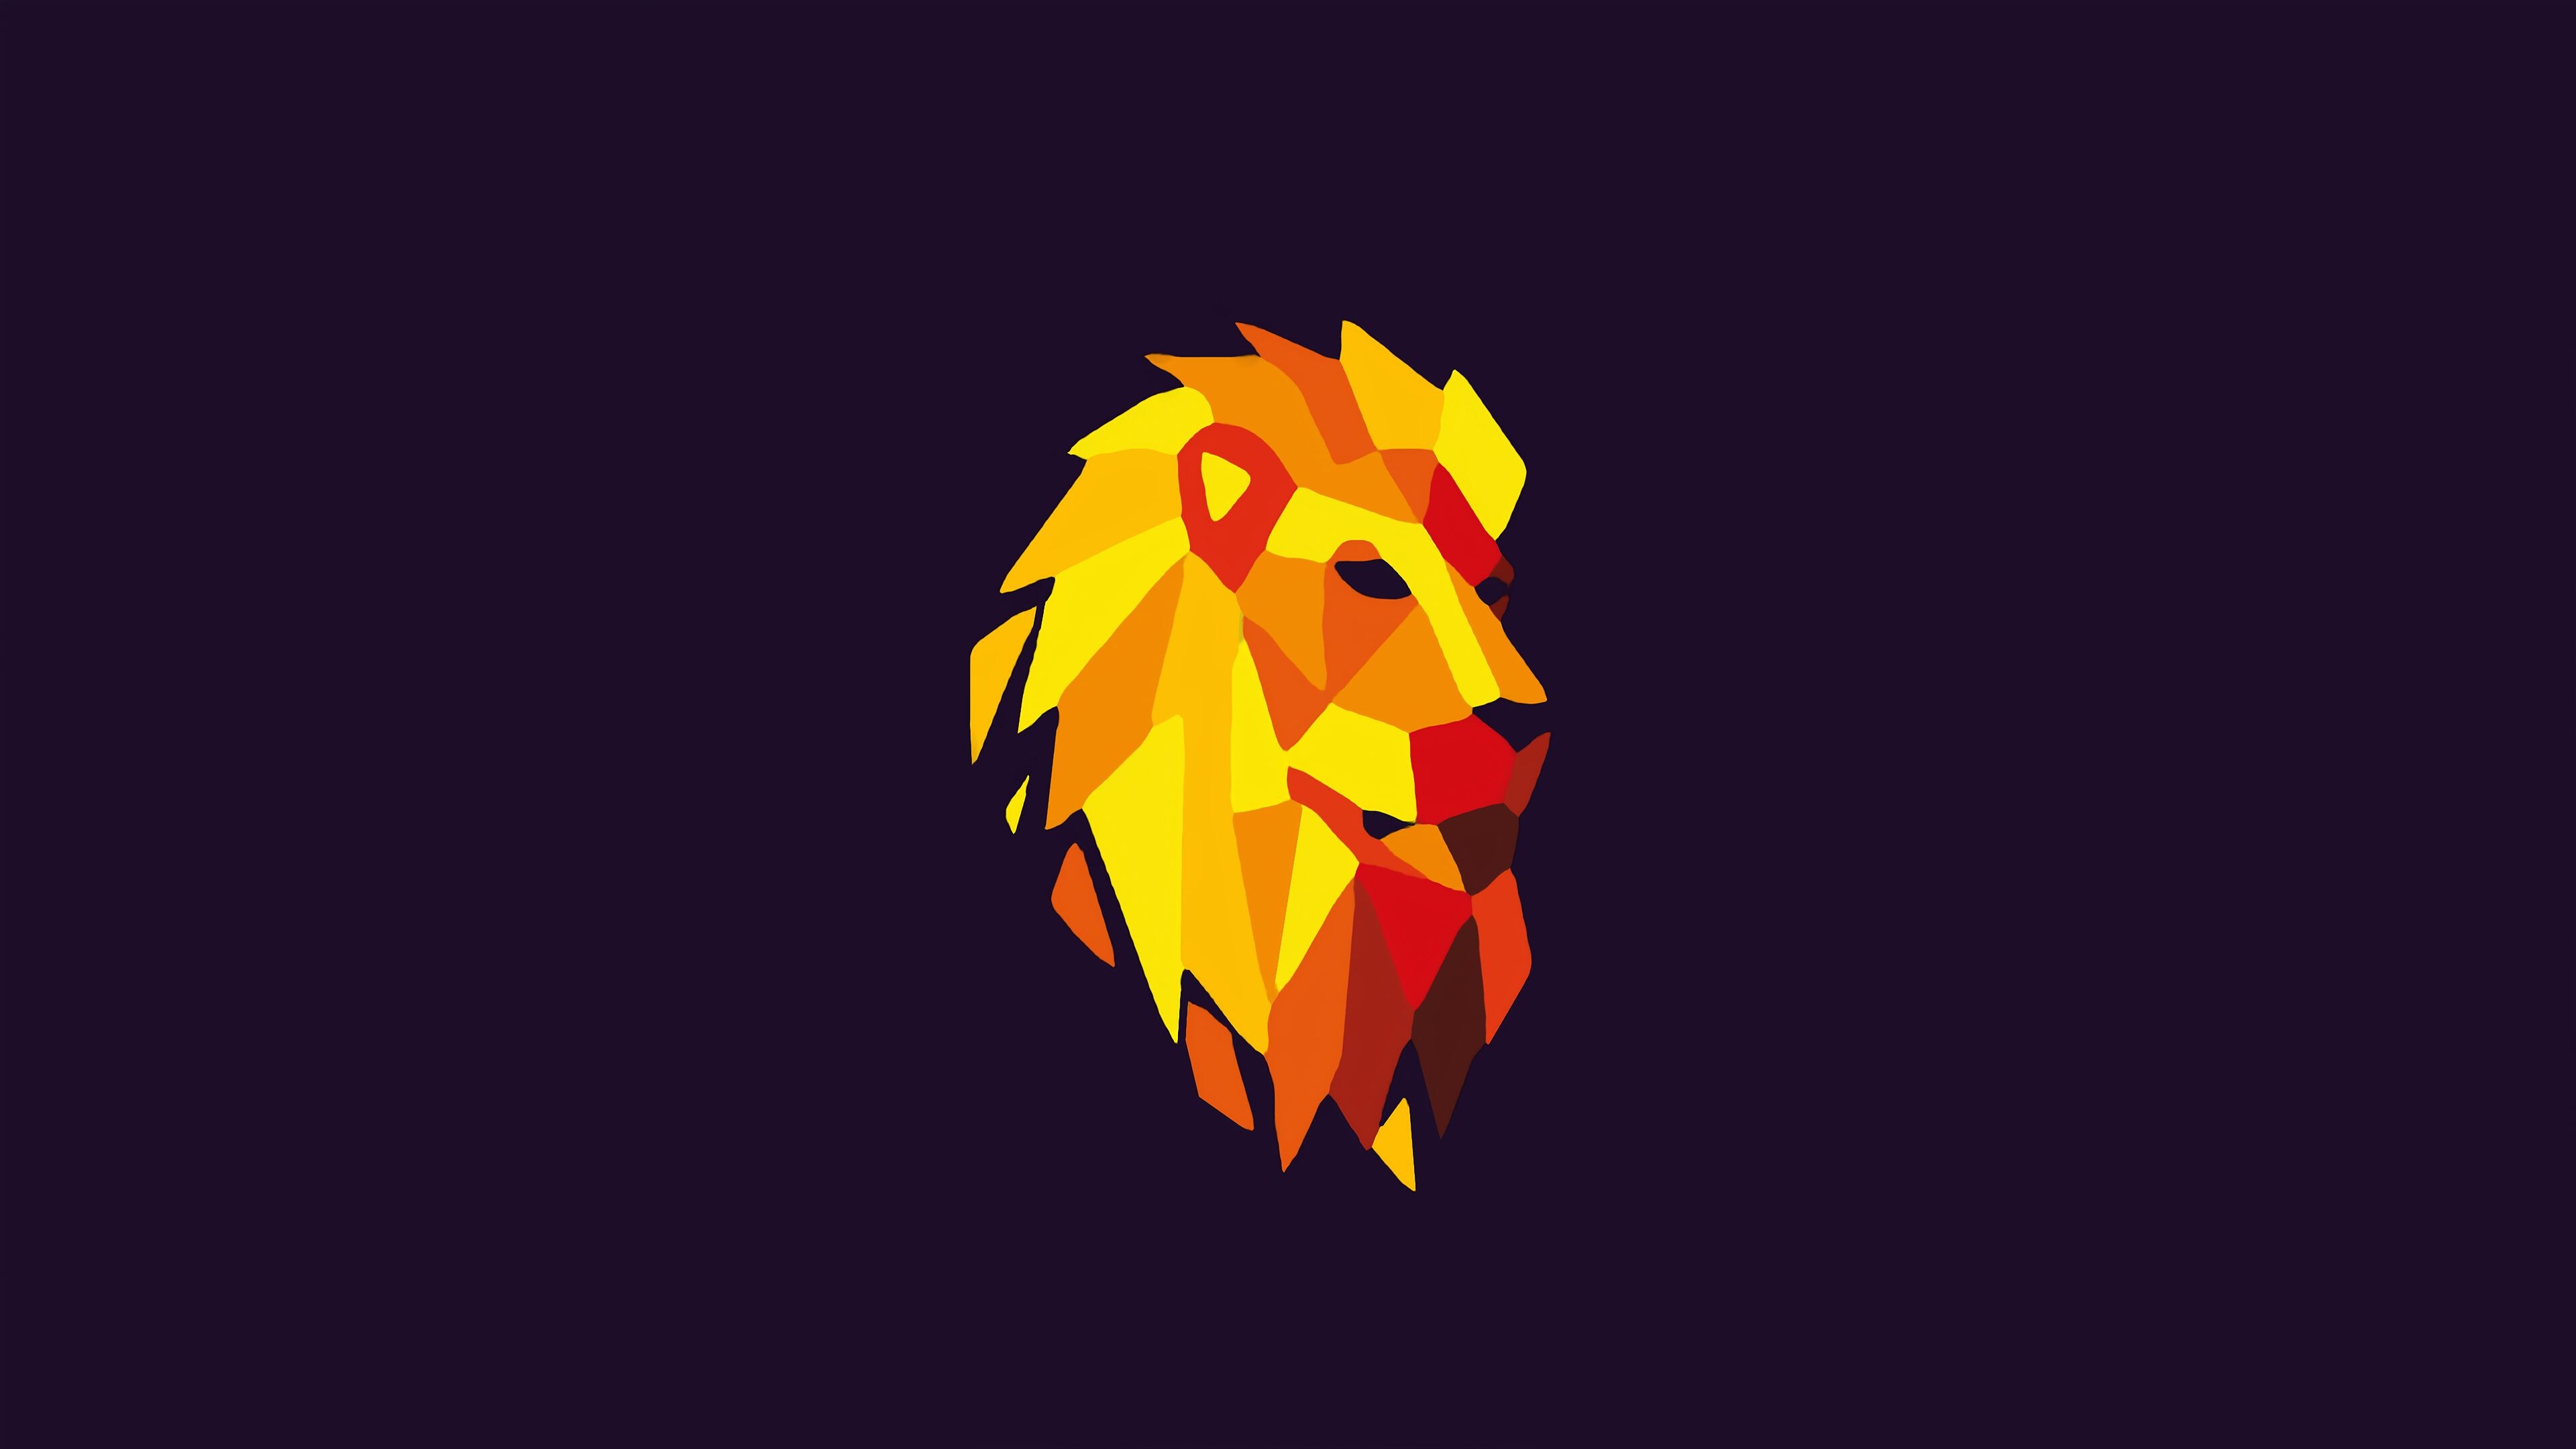 Geometric Animal: Polygonal lion, Art that uses straight and curved lines and color to form shapes. 3840x2160 4K Background.